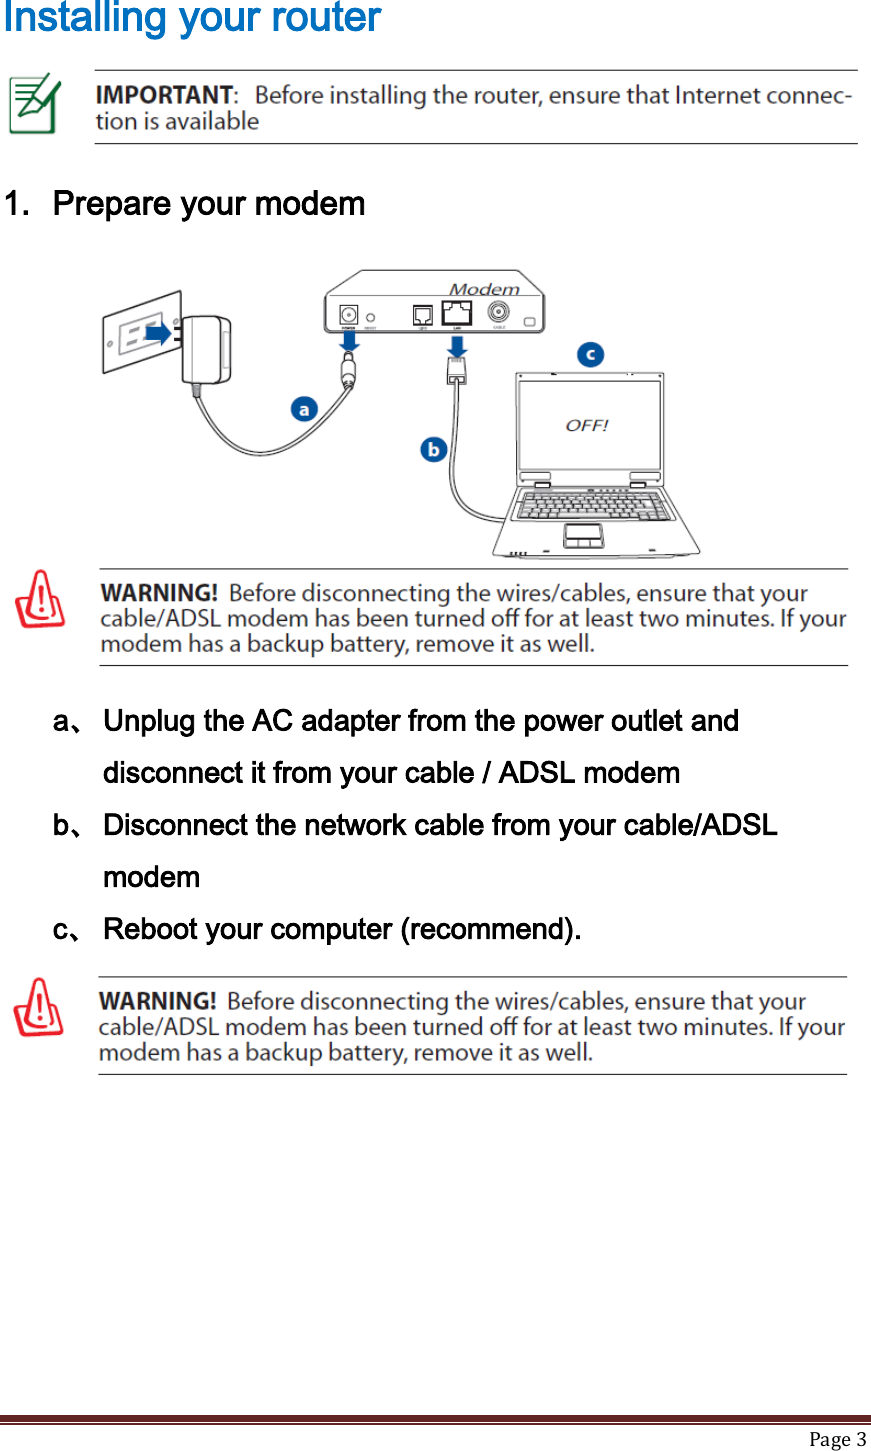   Page 3  Installing your router    1. Prepare your modem  a、 Unplug the AC adapter from the power outlet and disconnect it from your cable / ADSL modem b、 Disconnect the network cable from your cable/ADSL modem c、 Reboot your computer (recommend).      